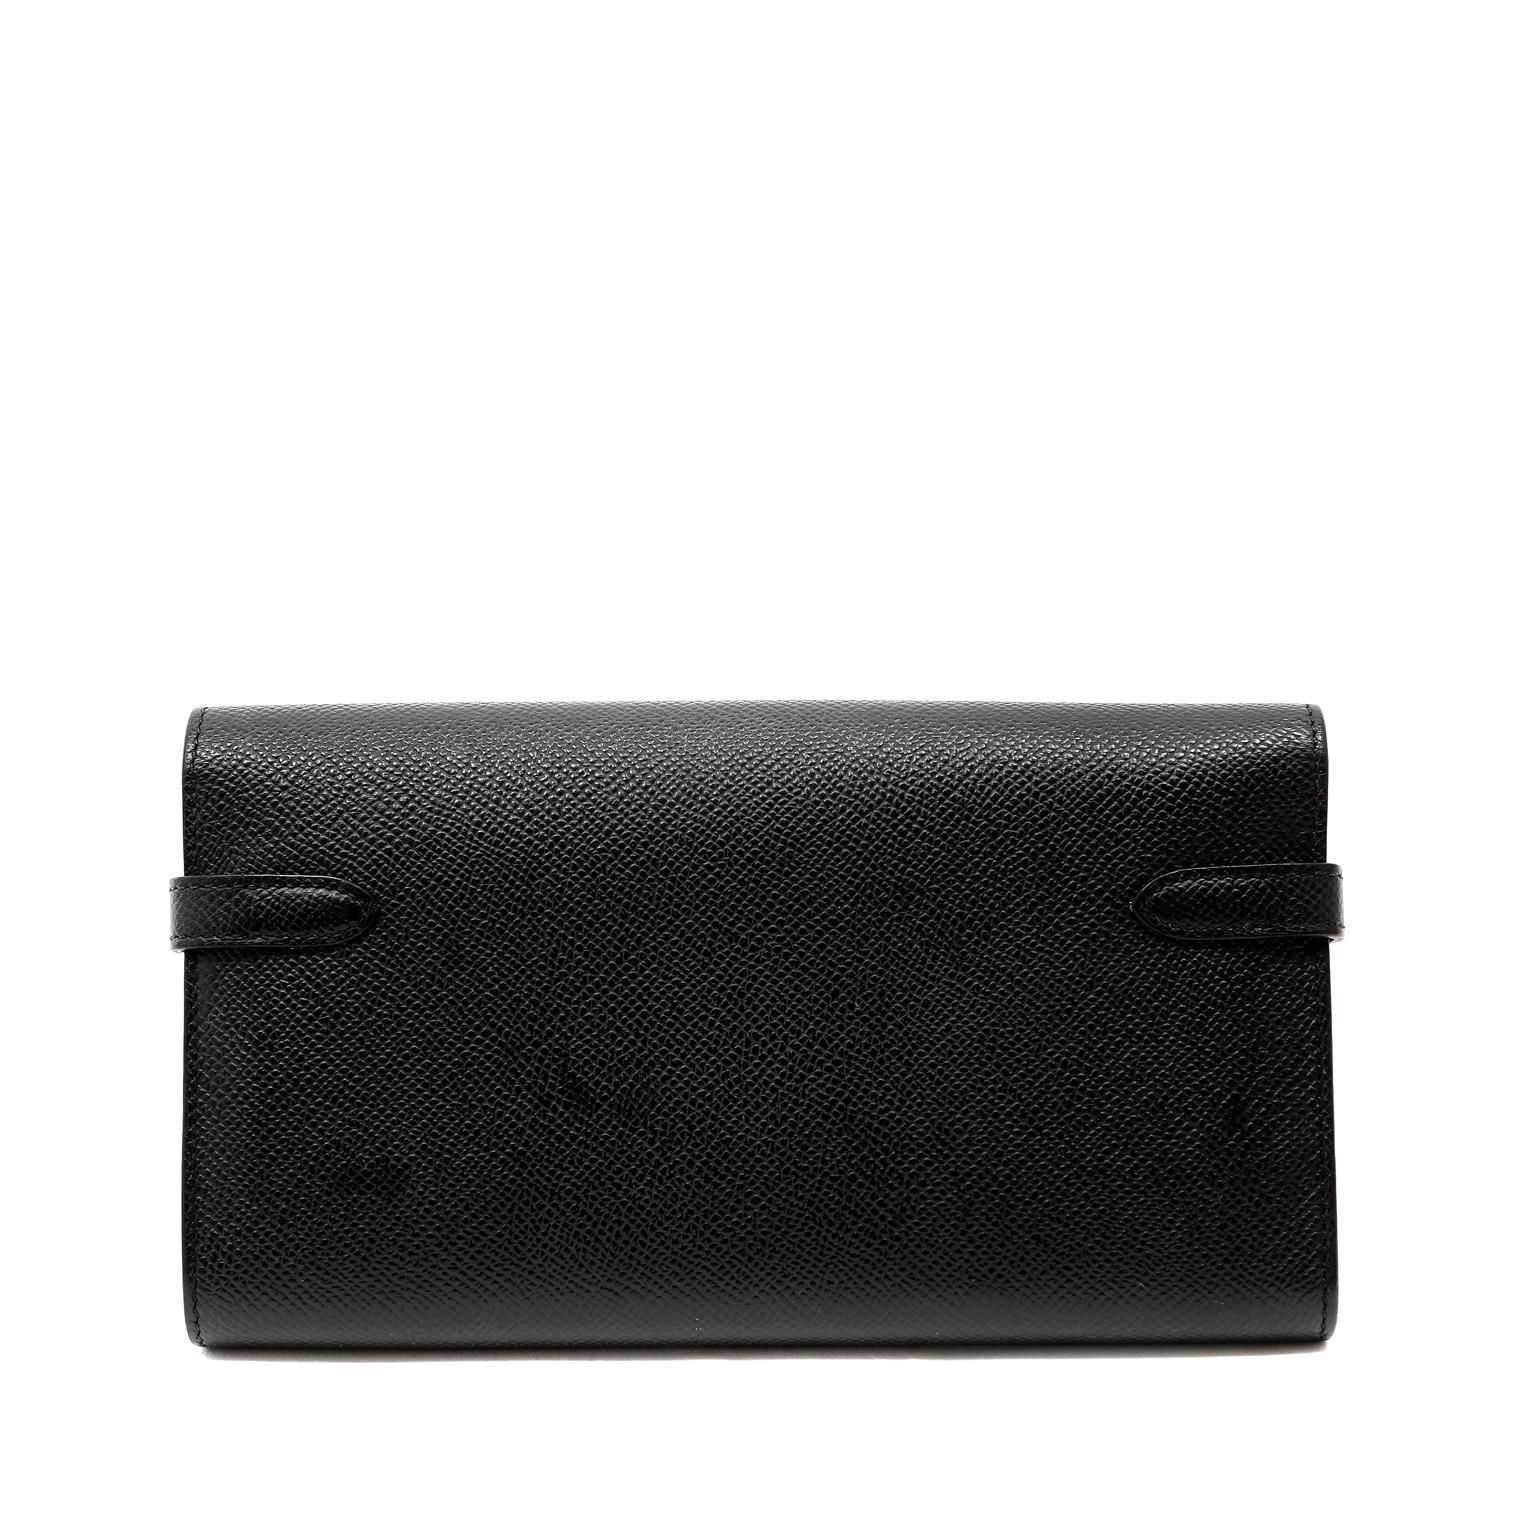 This authentic Hermès Black Epsom Kelly Wallet is in pristine unworn condition.  The perfect companion to organize cards, currency and coinage, the Classic Kelly Wallet is chic and functional.
Sleek black Epsom leather is textured and durable,